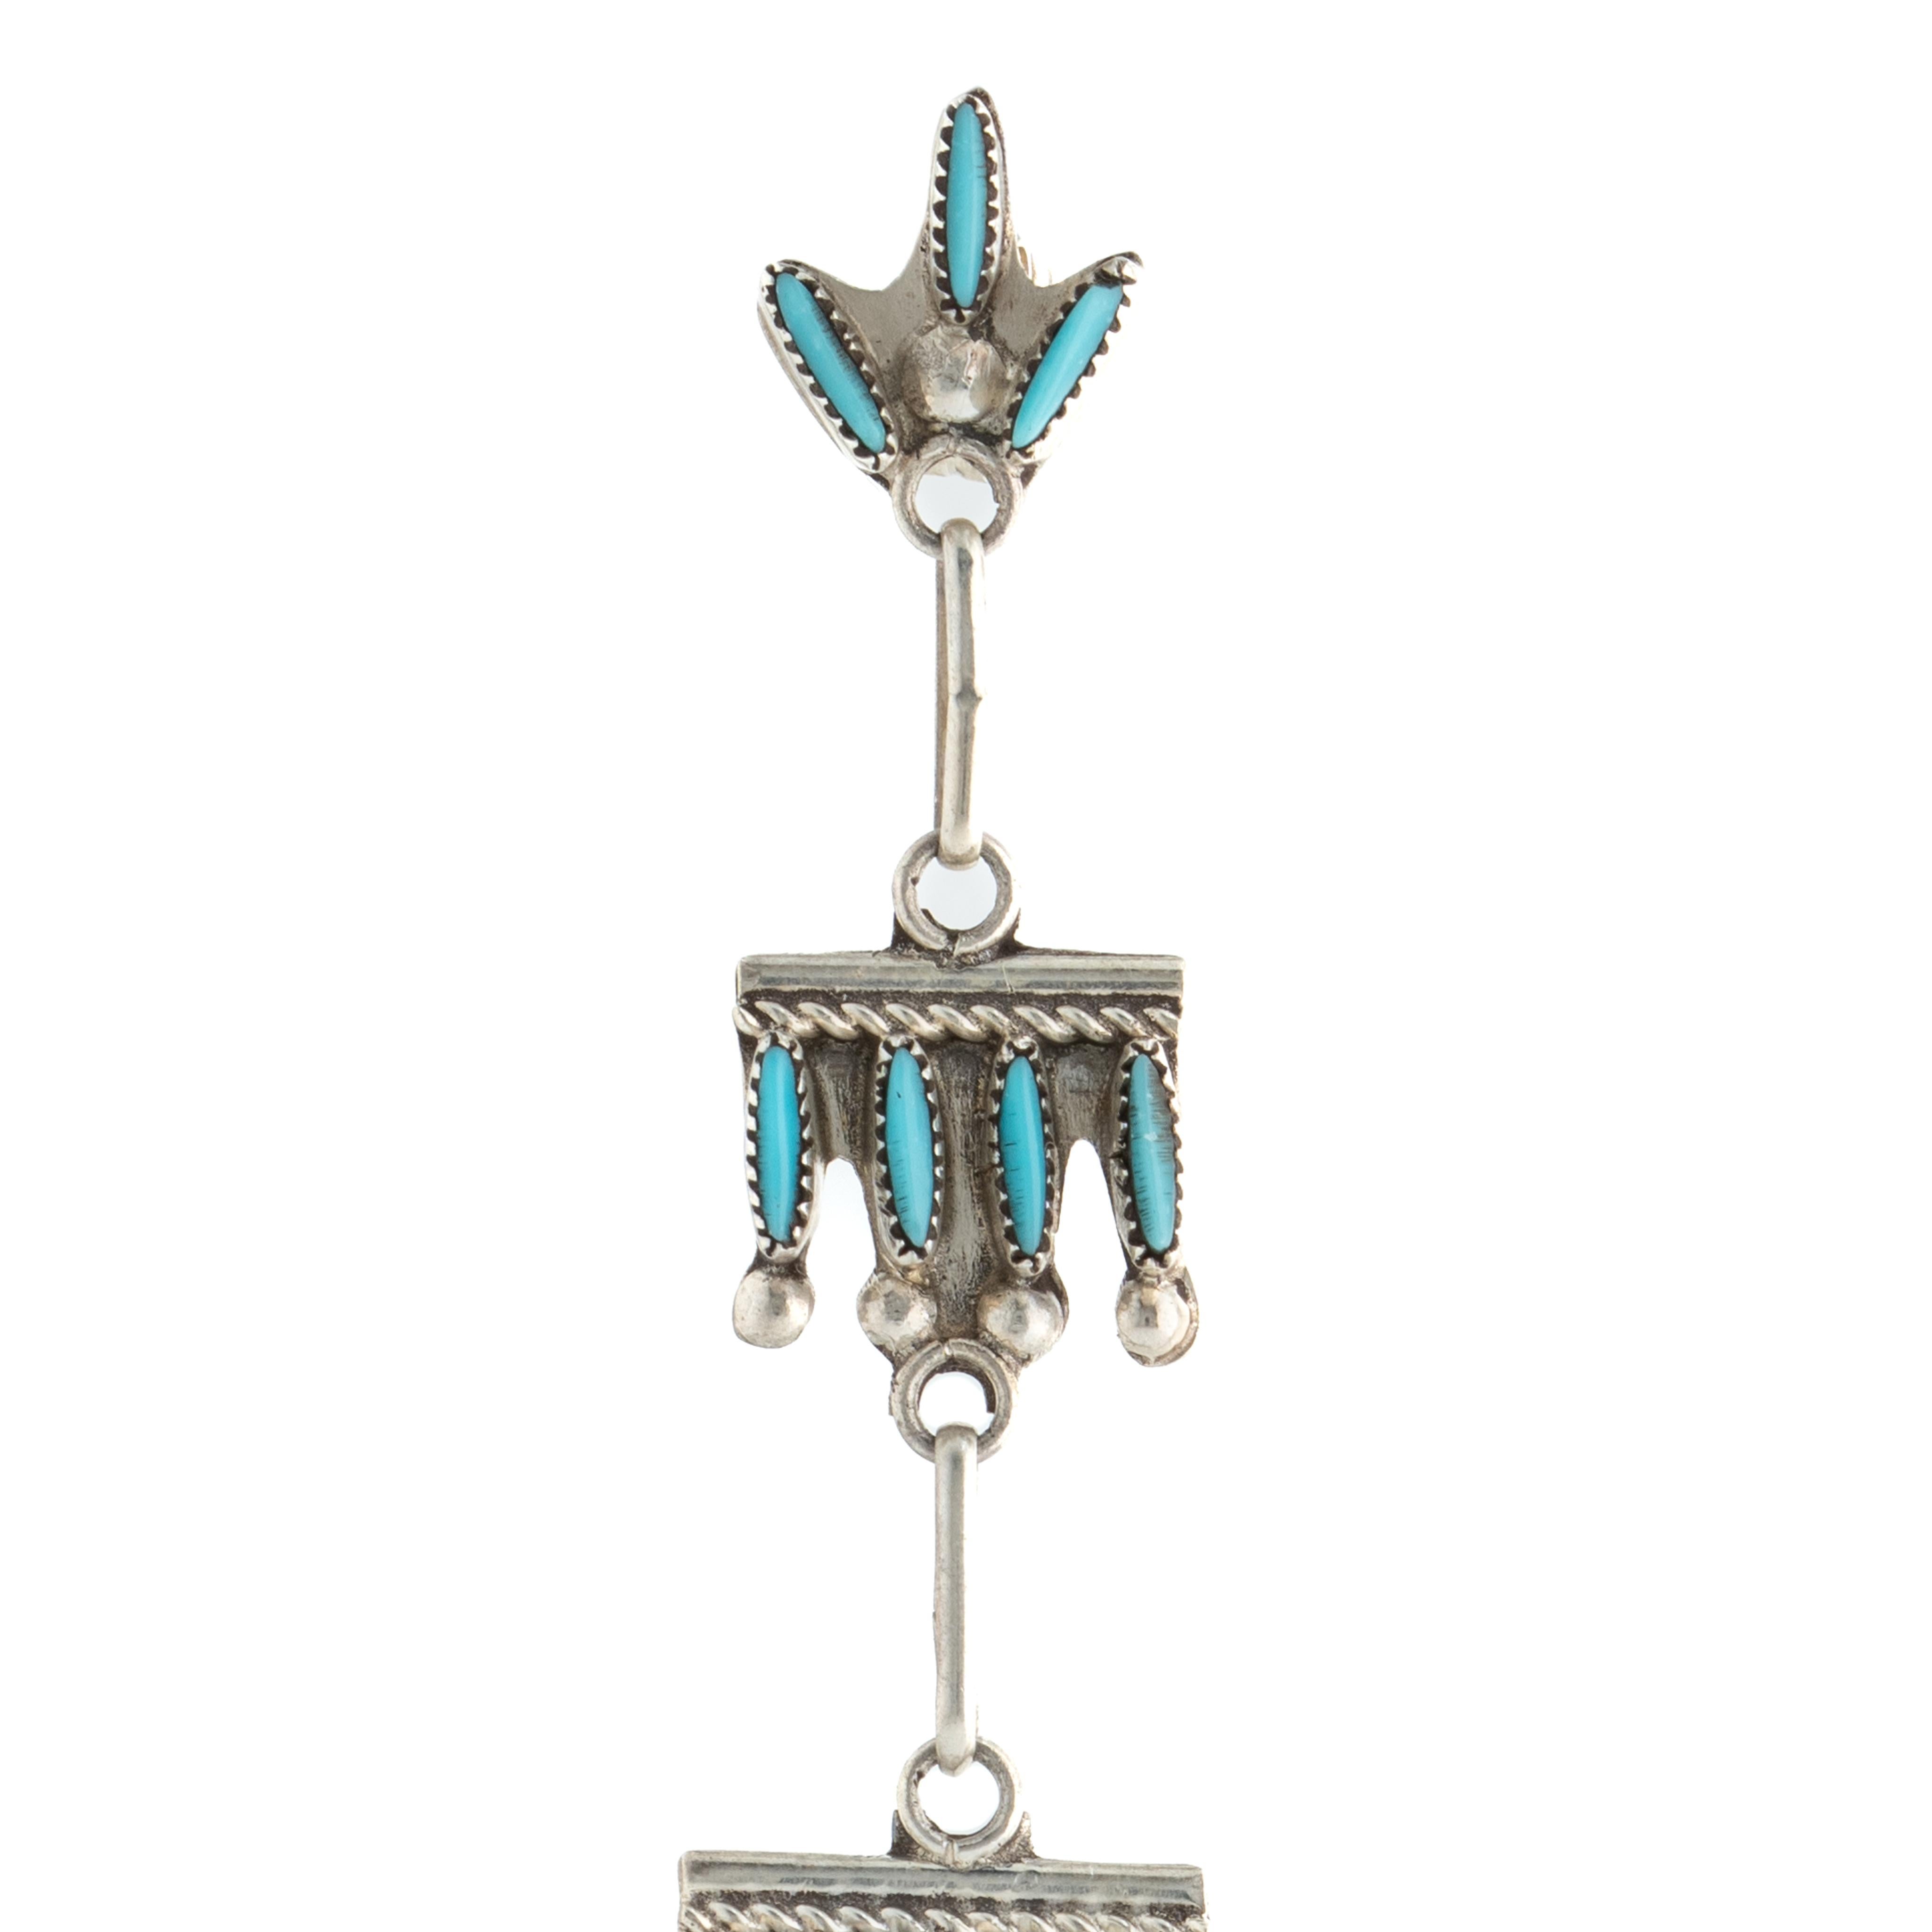 Vintage Zuni Silver and Needlepoint Turquoise Raindrops and Rope Chandelier Earrings c.1970s

Each earring weighs: 5.61 grams
Length: 3.6